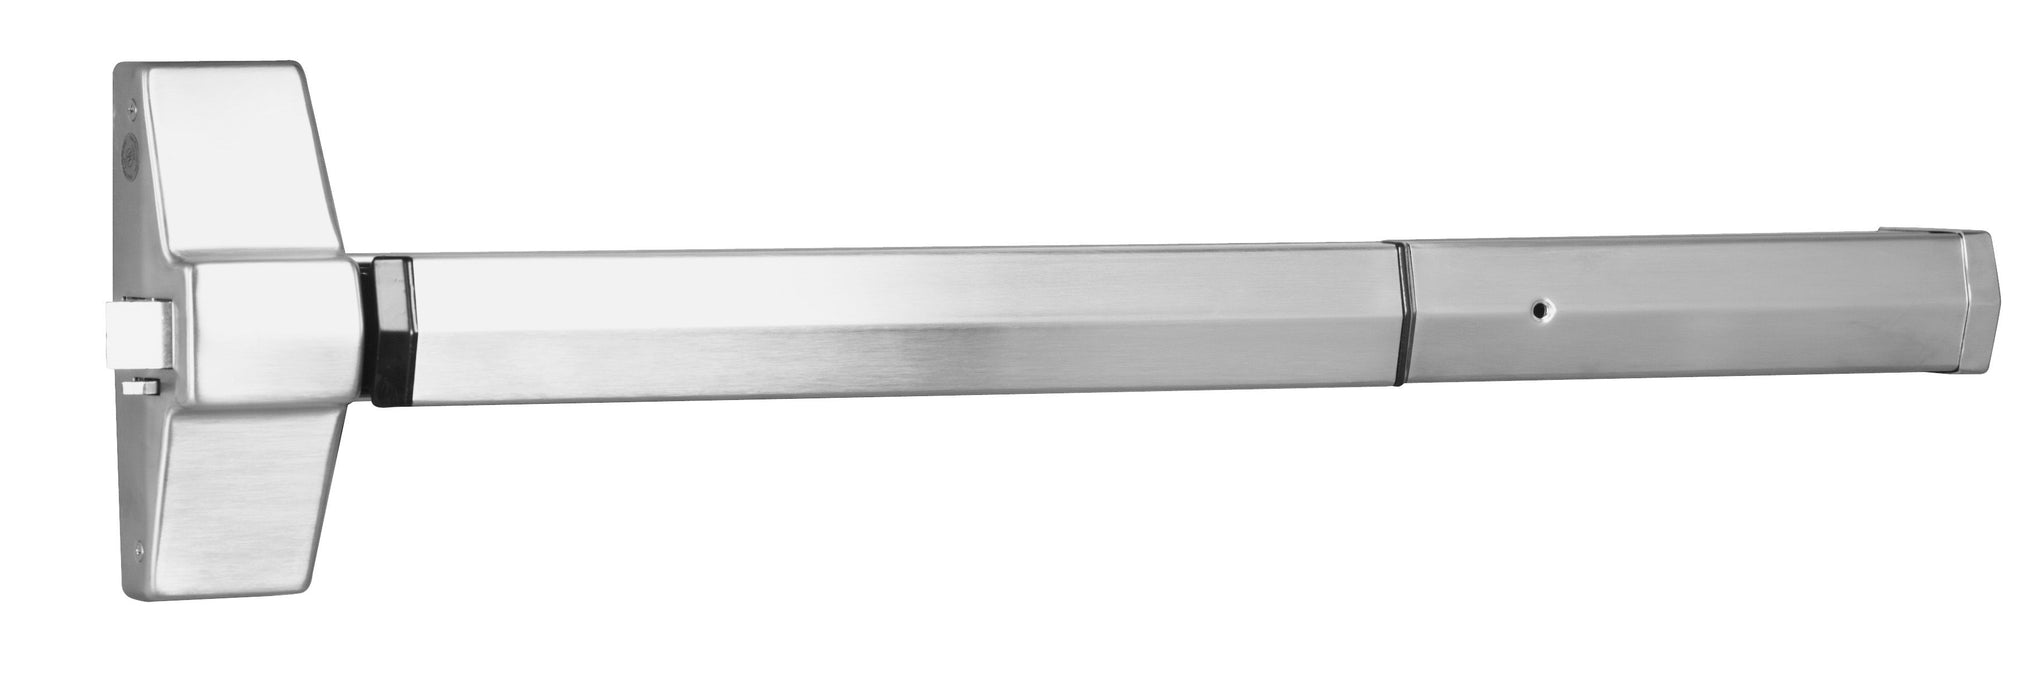 Yale Commercial 7100F36630 Fire Rated 3' Rim Exit Only Exit Device US32D (630) Satin Stainless Steel Finish